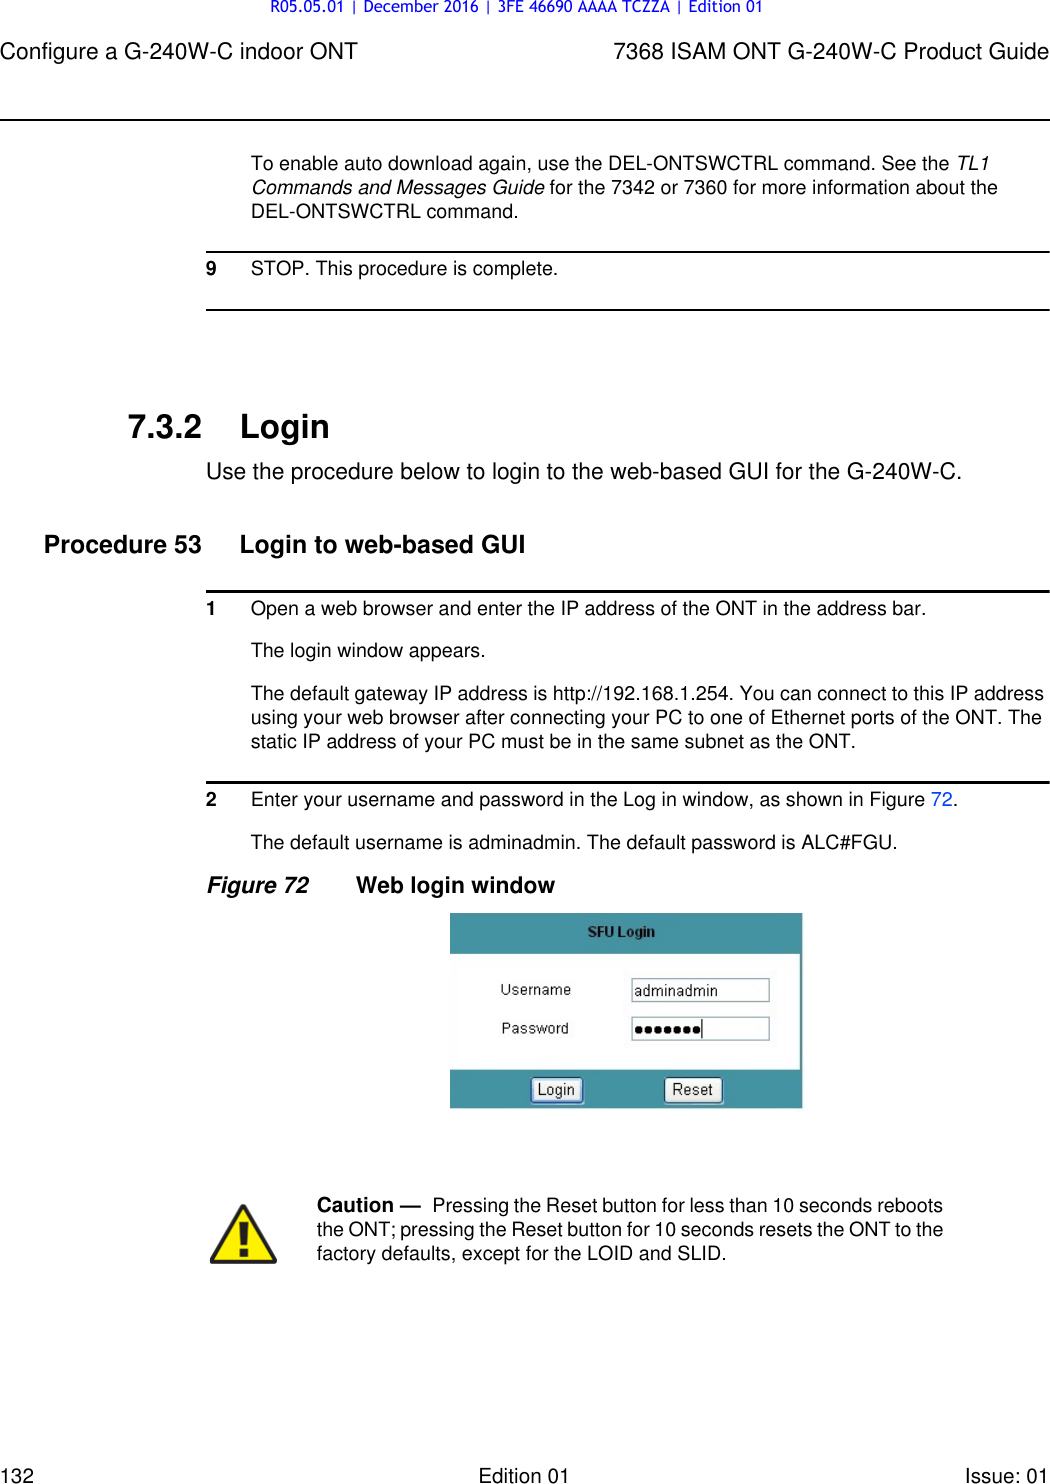 Page 132 of Nokia Bell G240W-C GPON ONU User Manual 7368 ISAM ONT G 240W B Product Guide